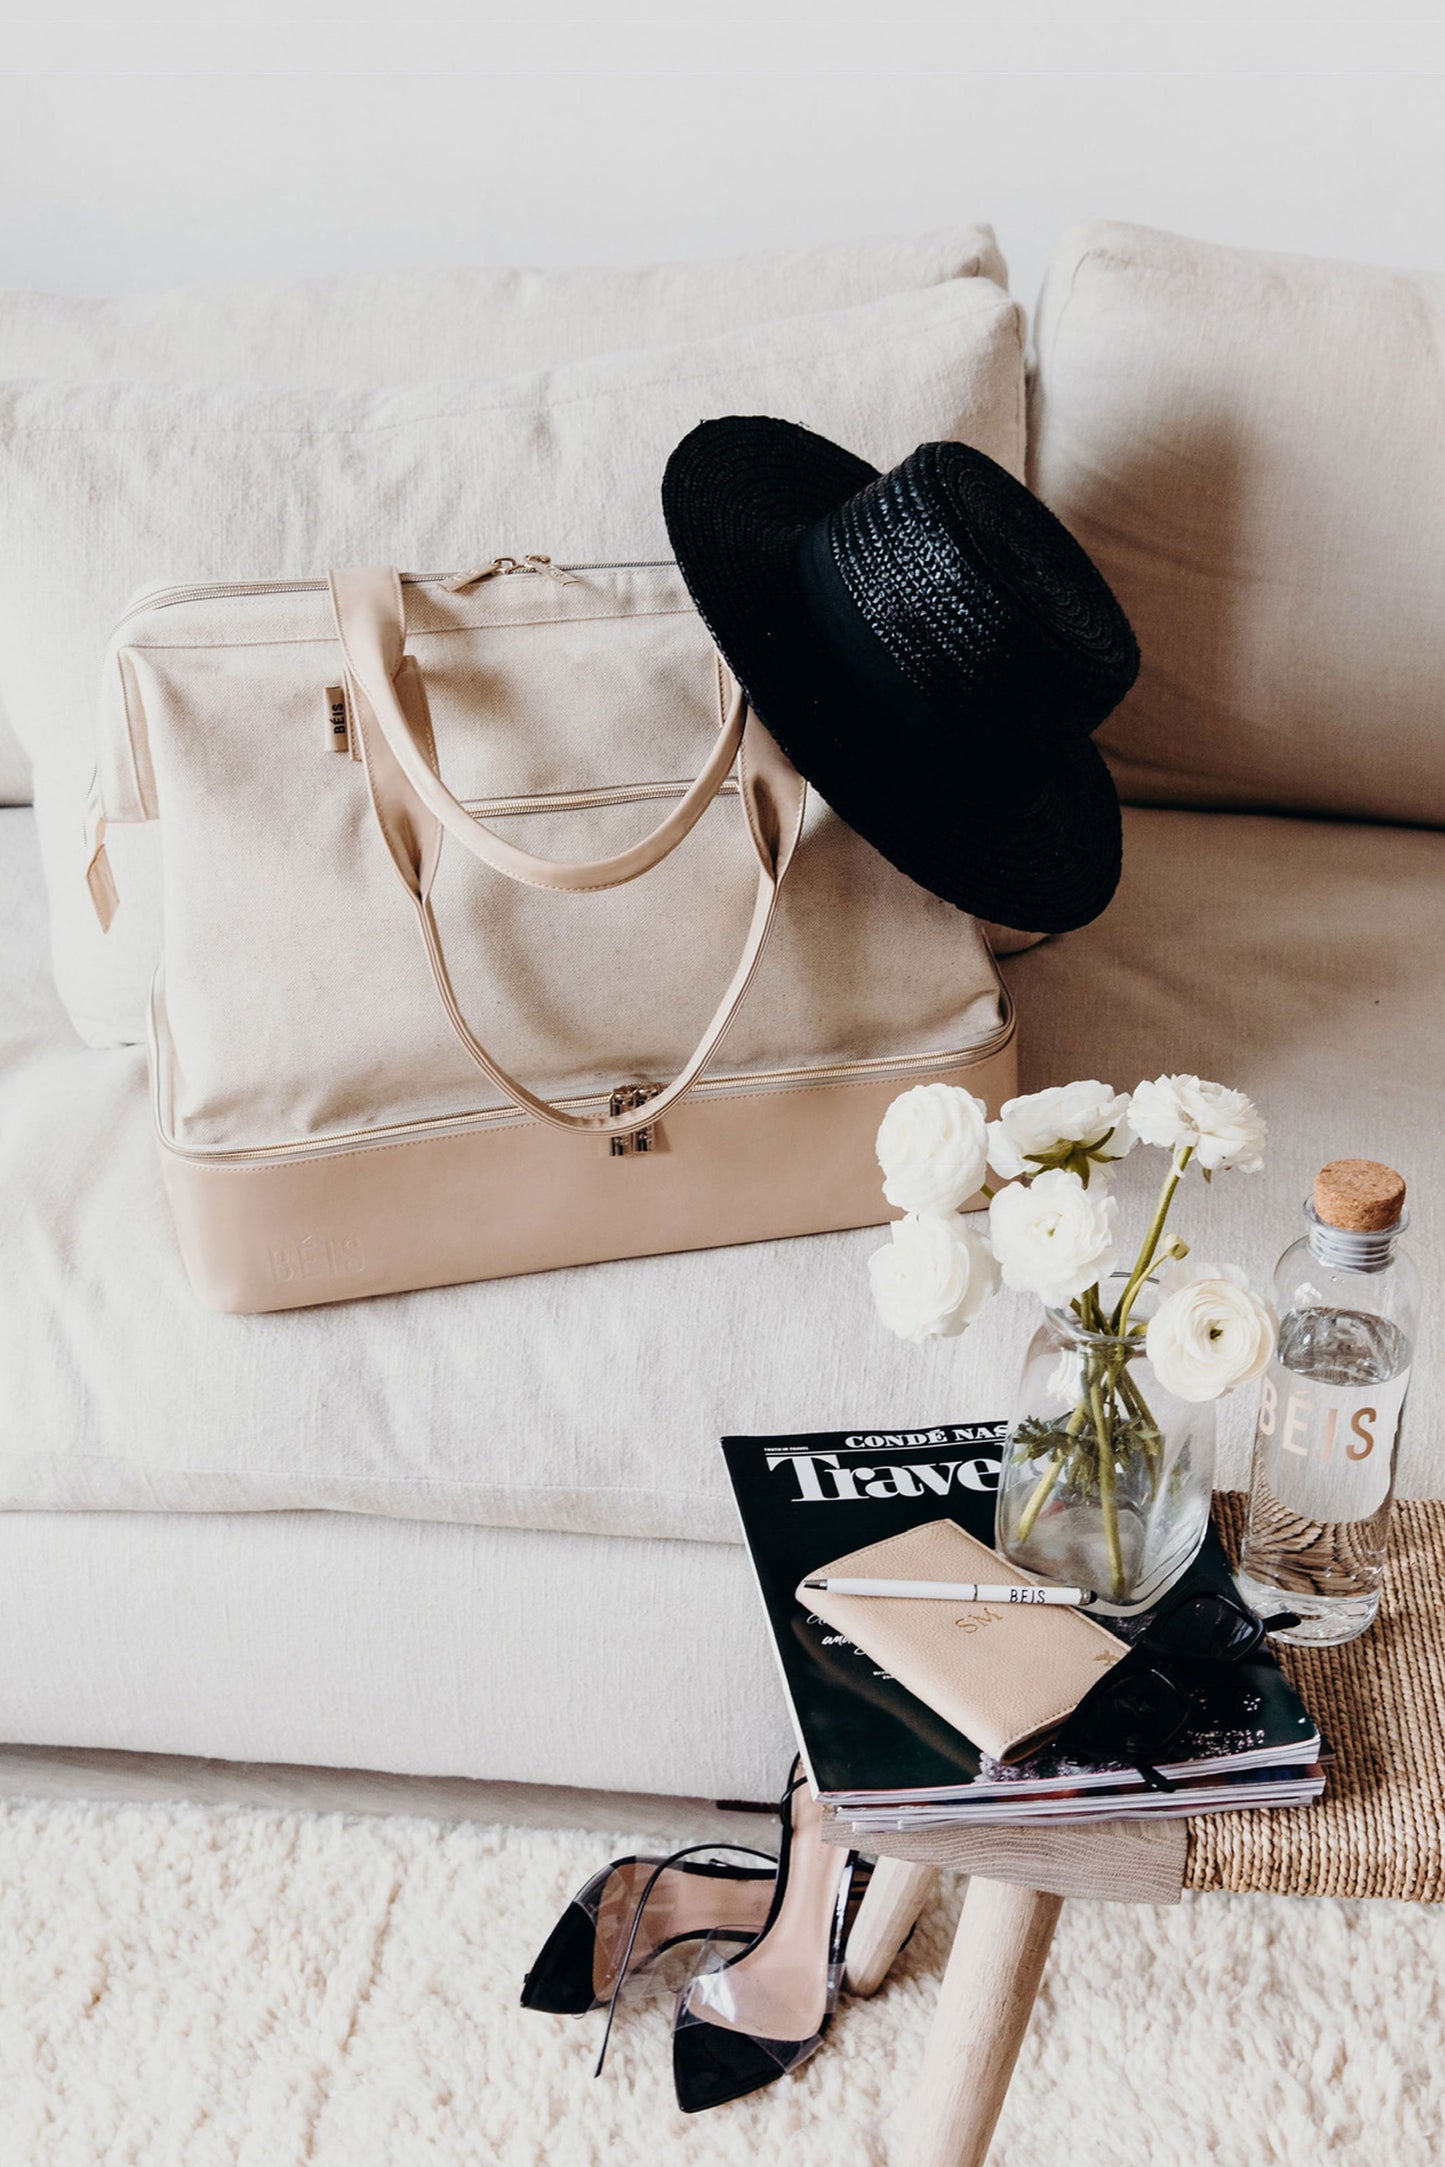 BEIS by Shay Mitchell | The Weekender in Beige on couch in living room